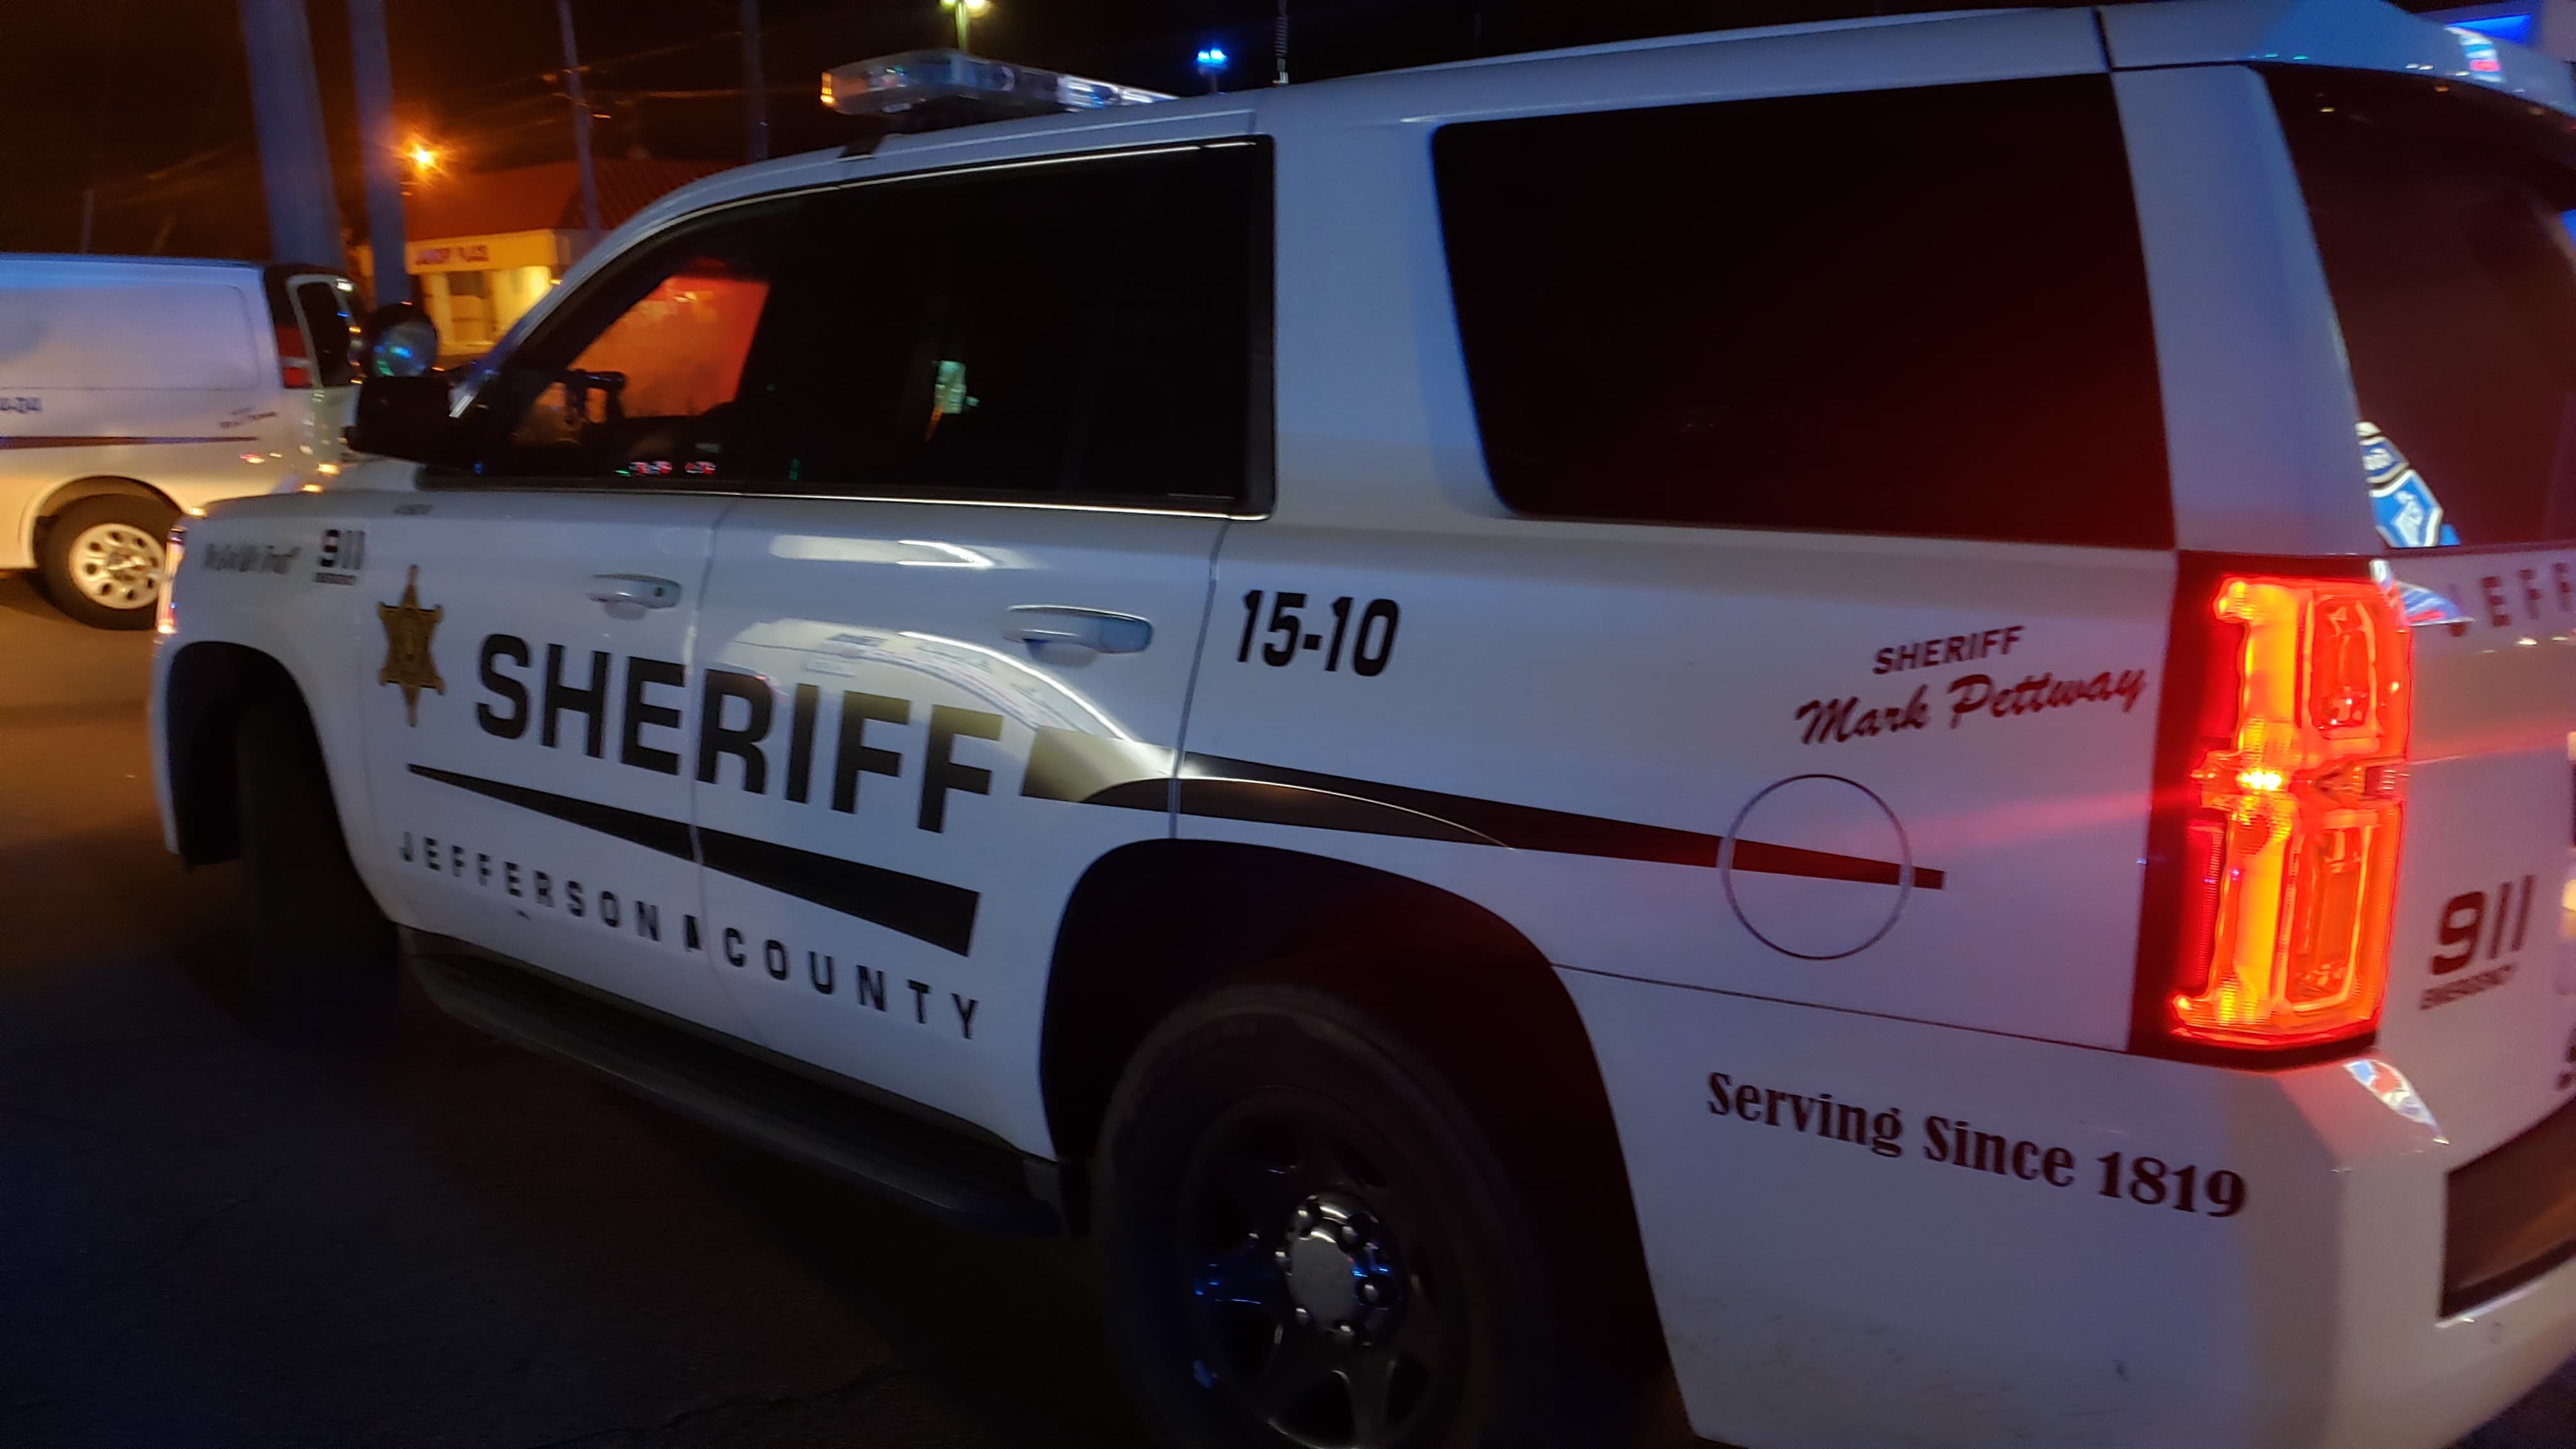 Woman shot while driving, Jefferson County Sheriff's Office investigating